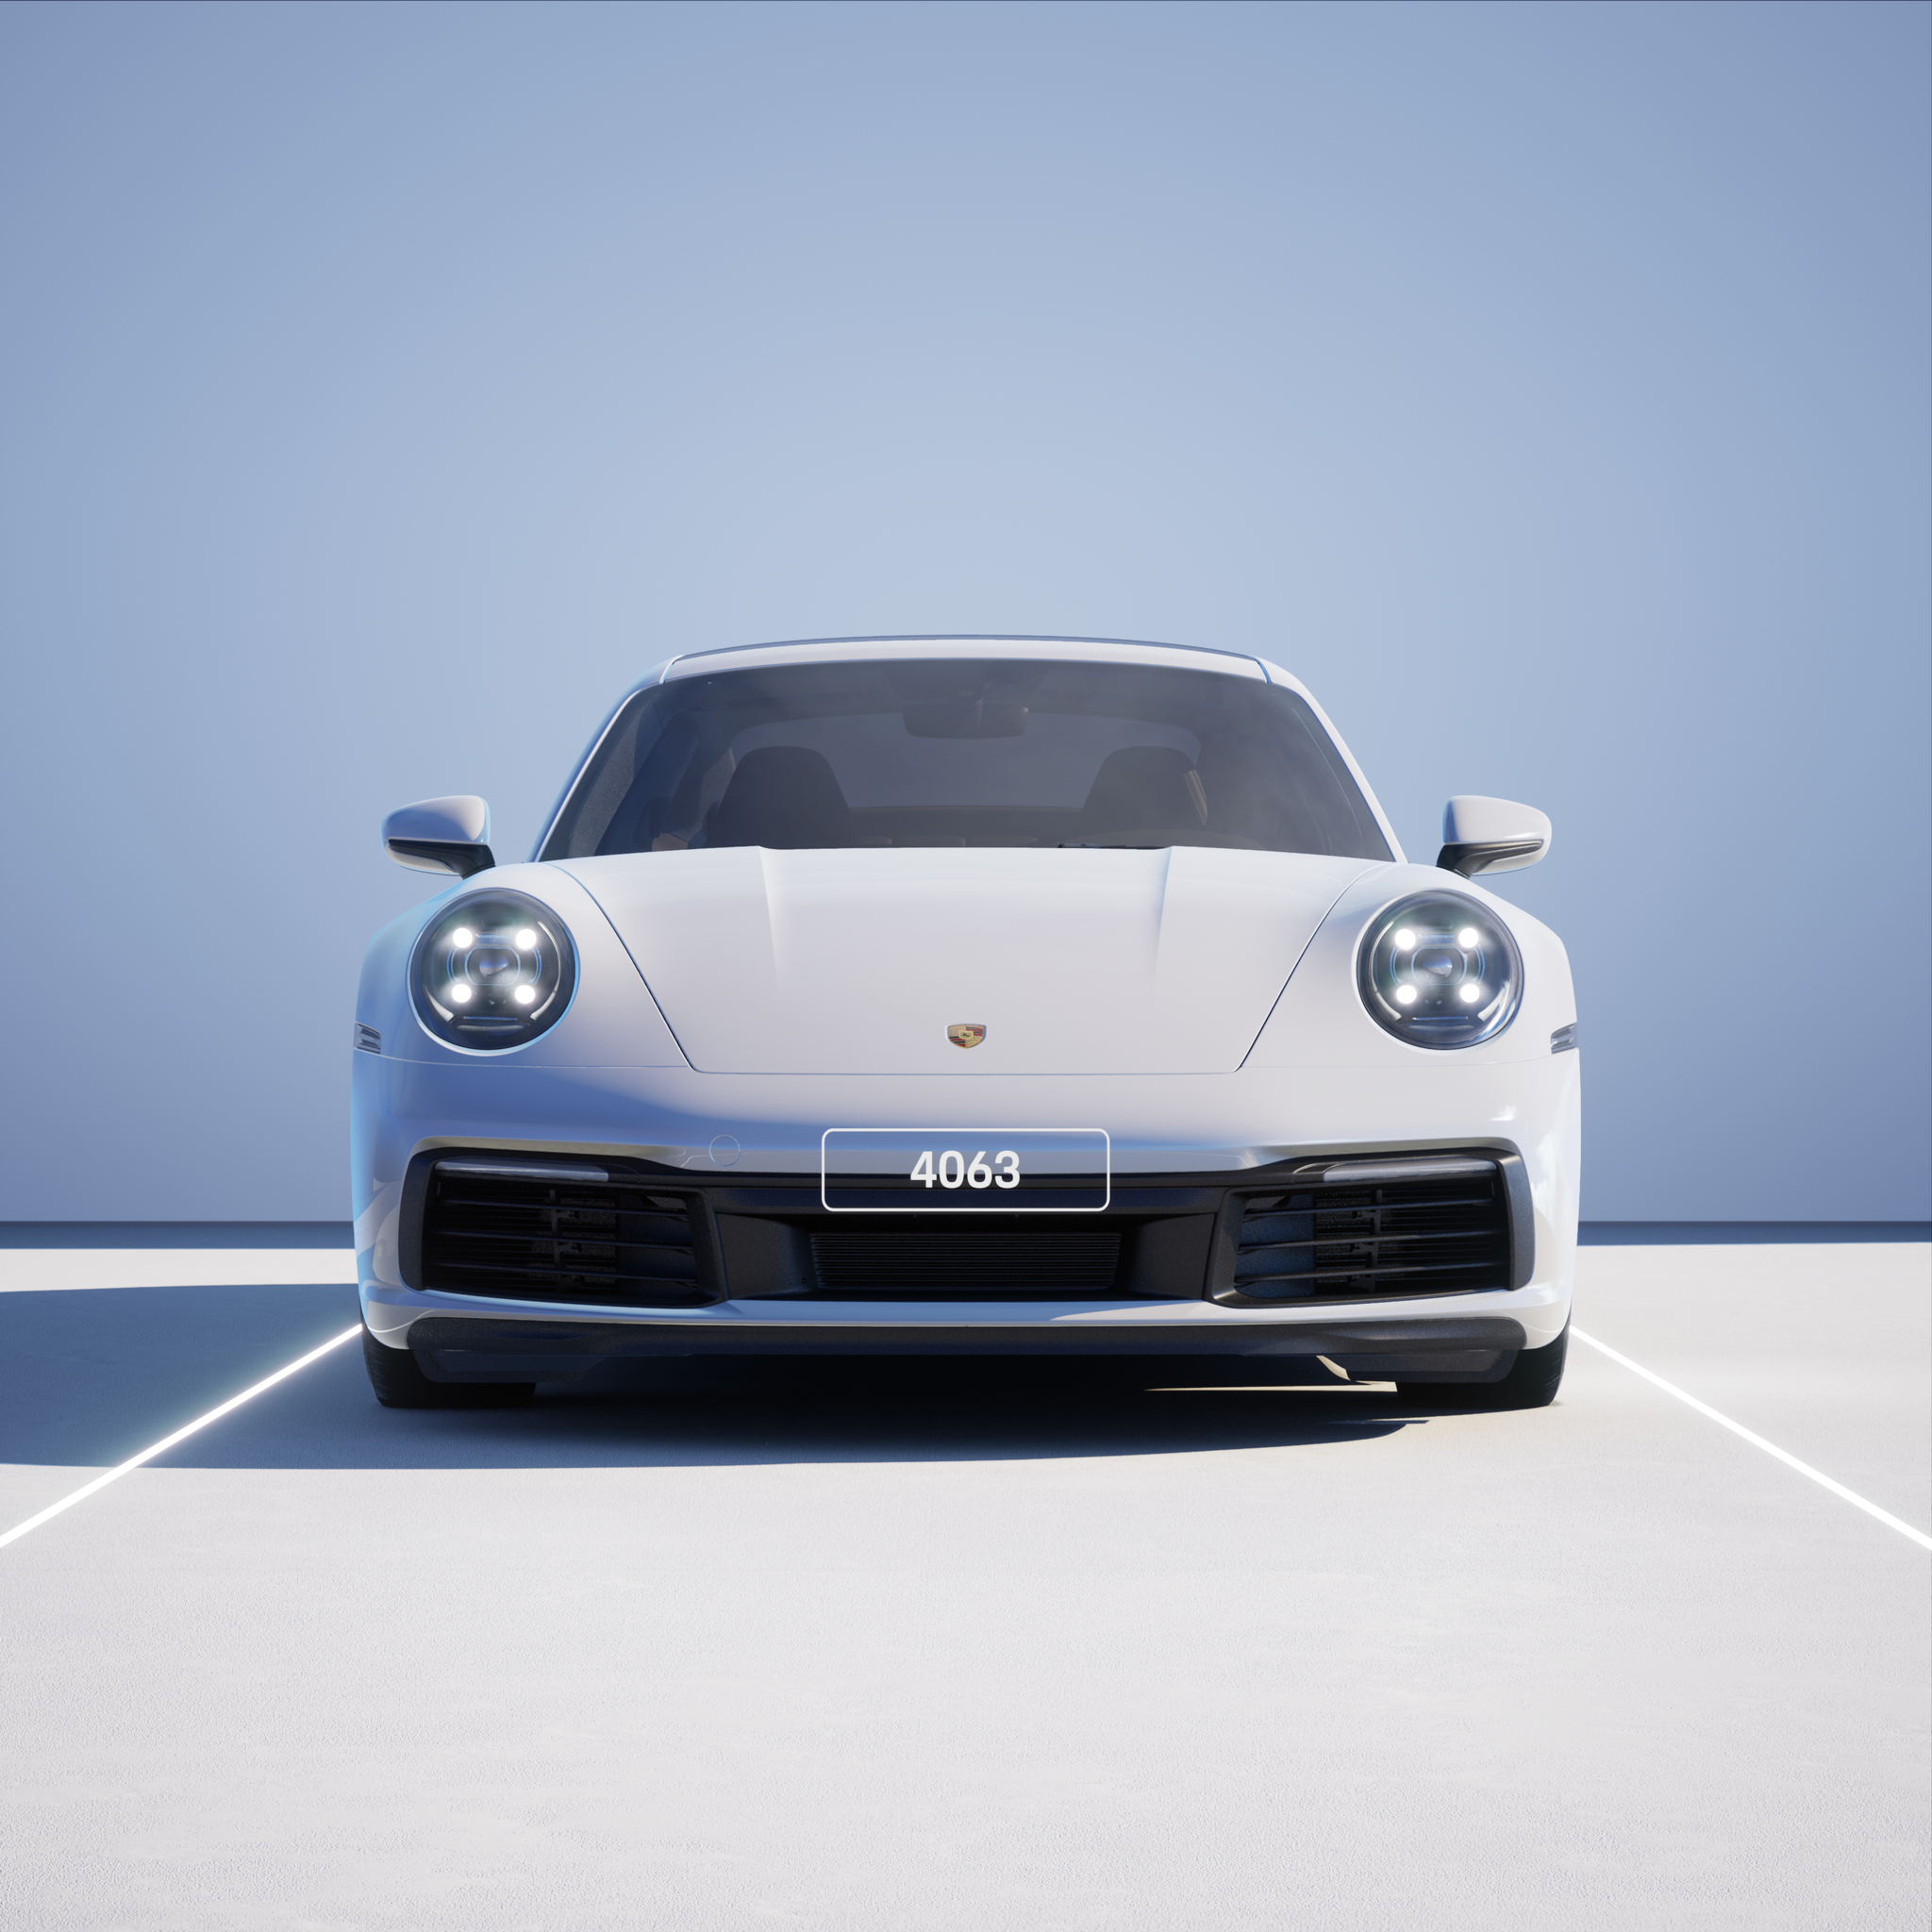 The PORSCHΞ 911 4063 image in phase